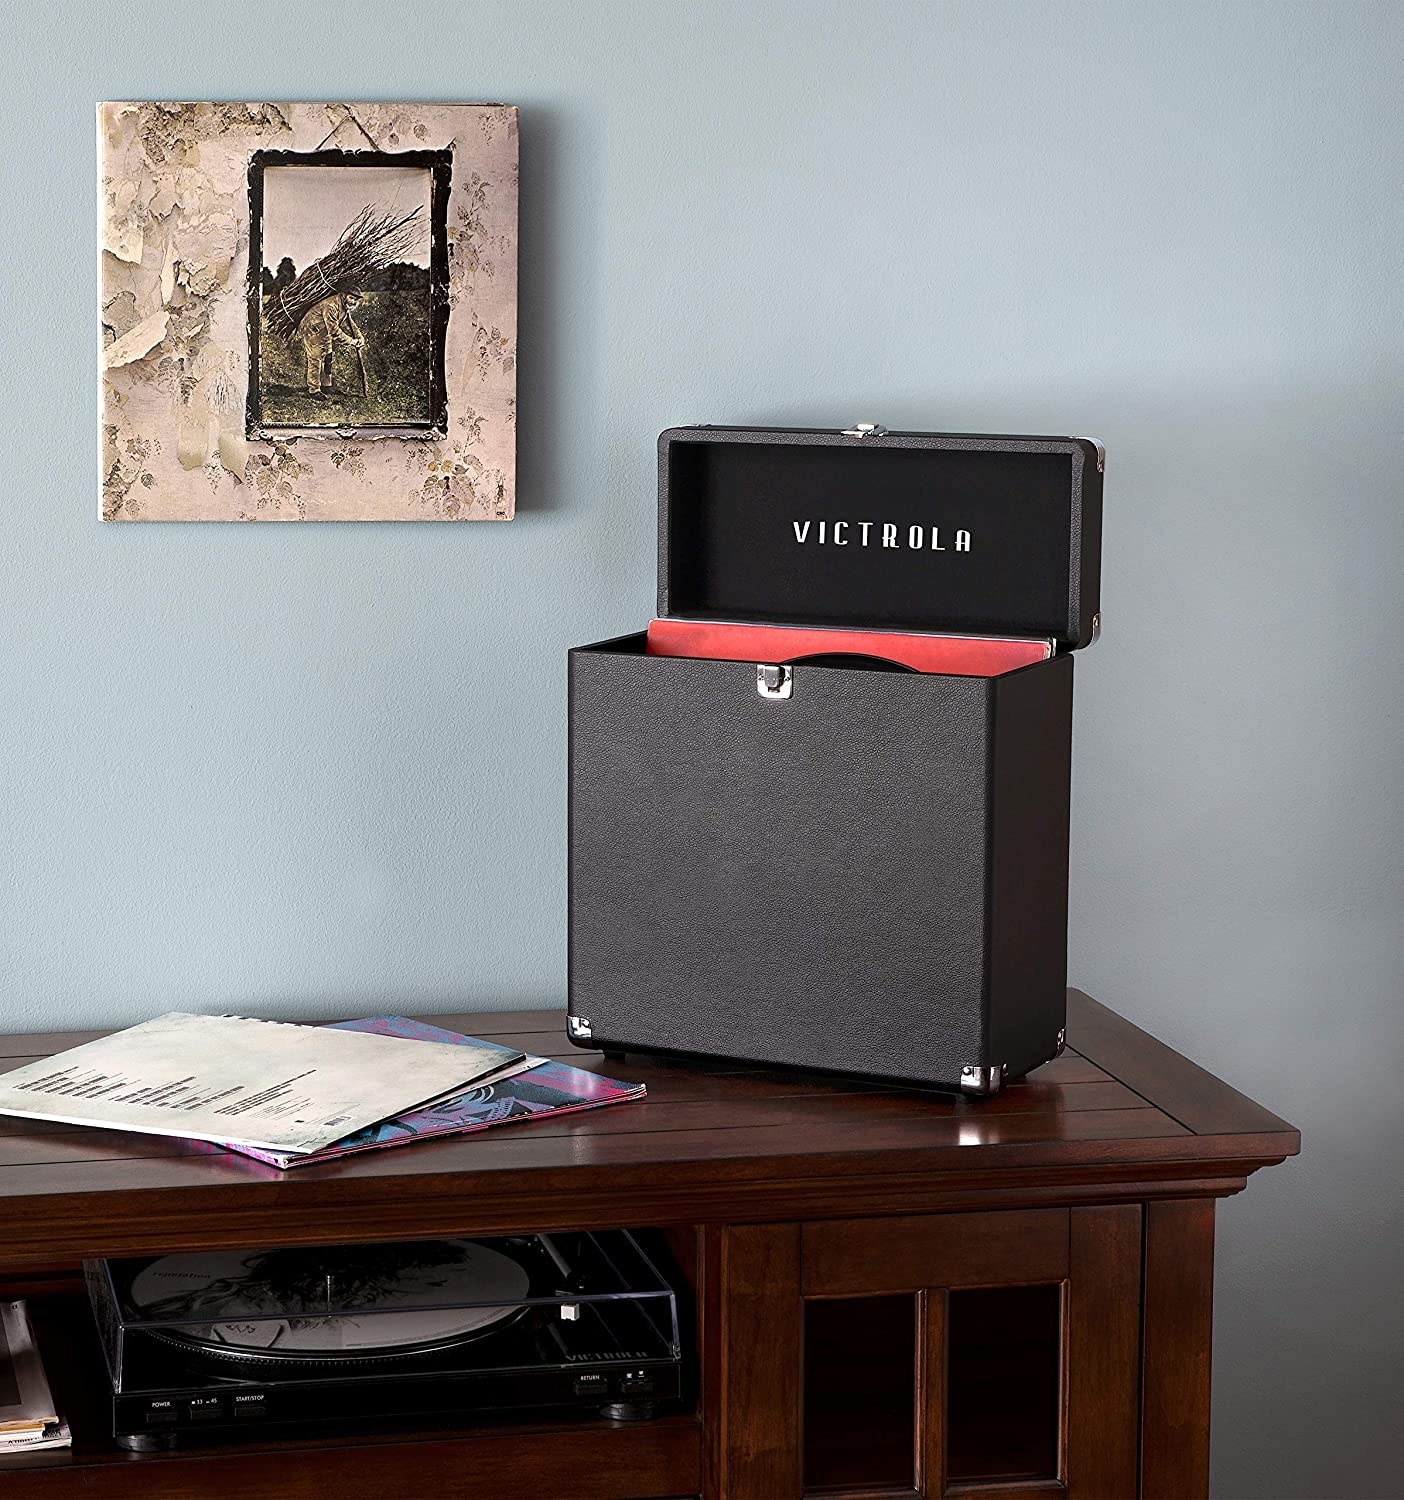 A storage box propped open with records inside on top of a table with a record player underneath, and a record on the wall